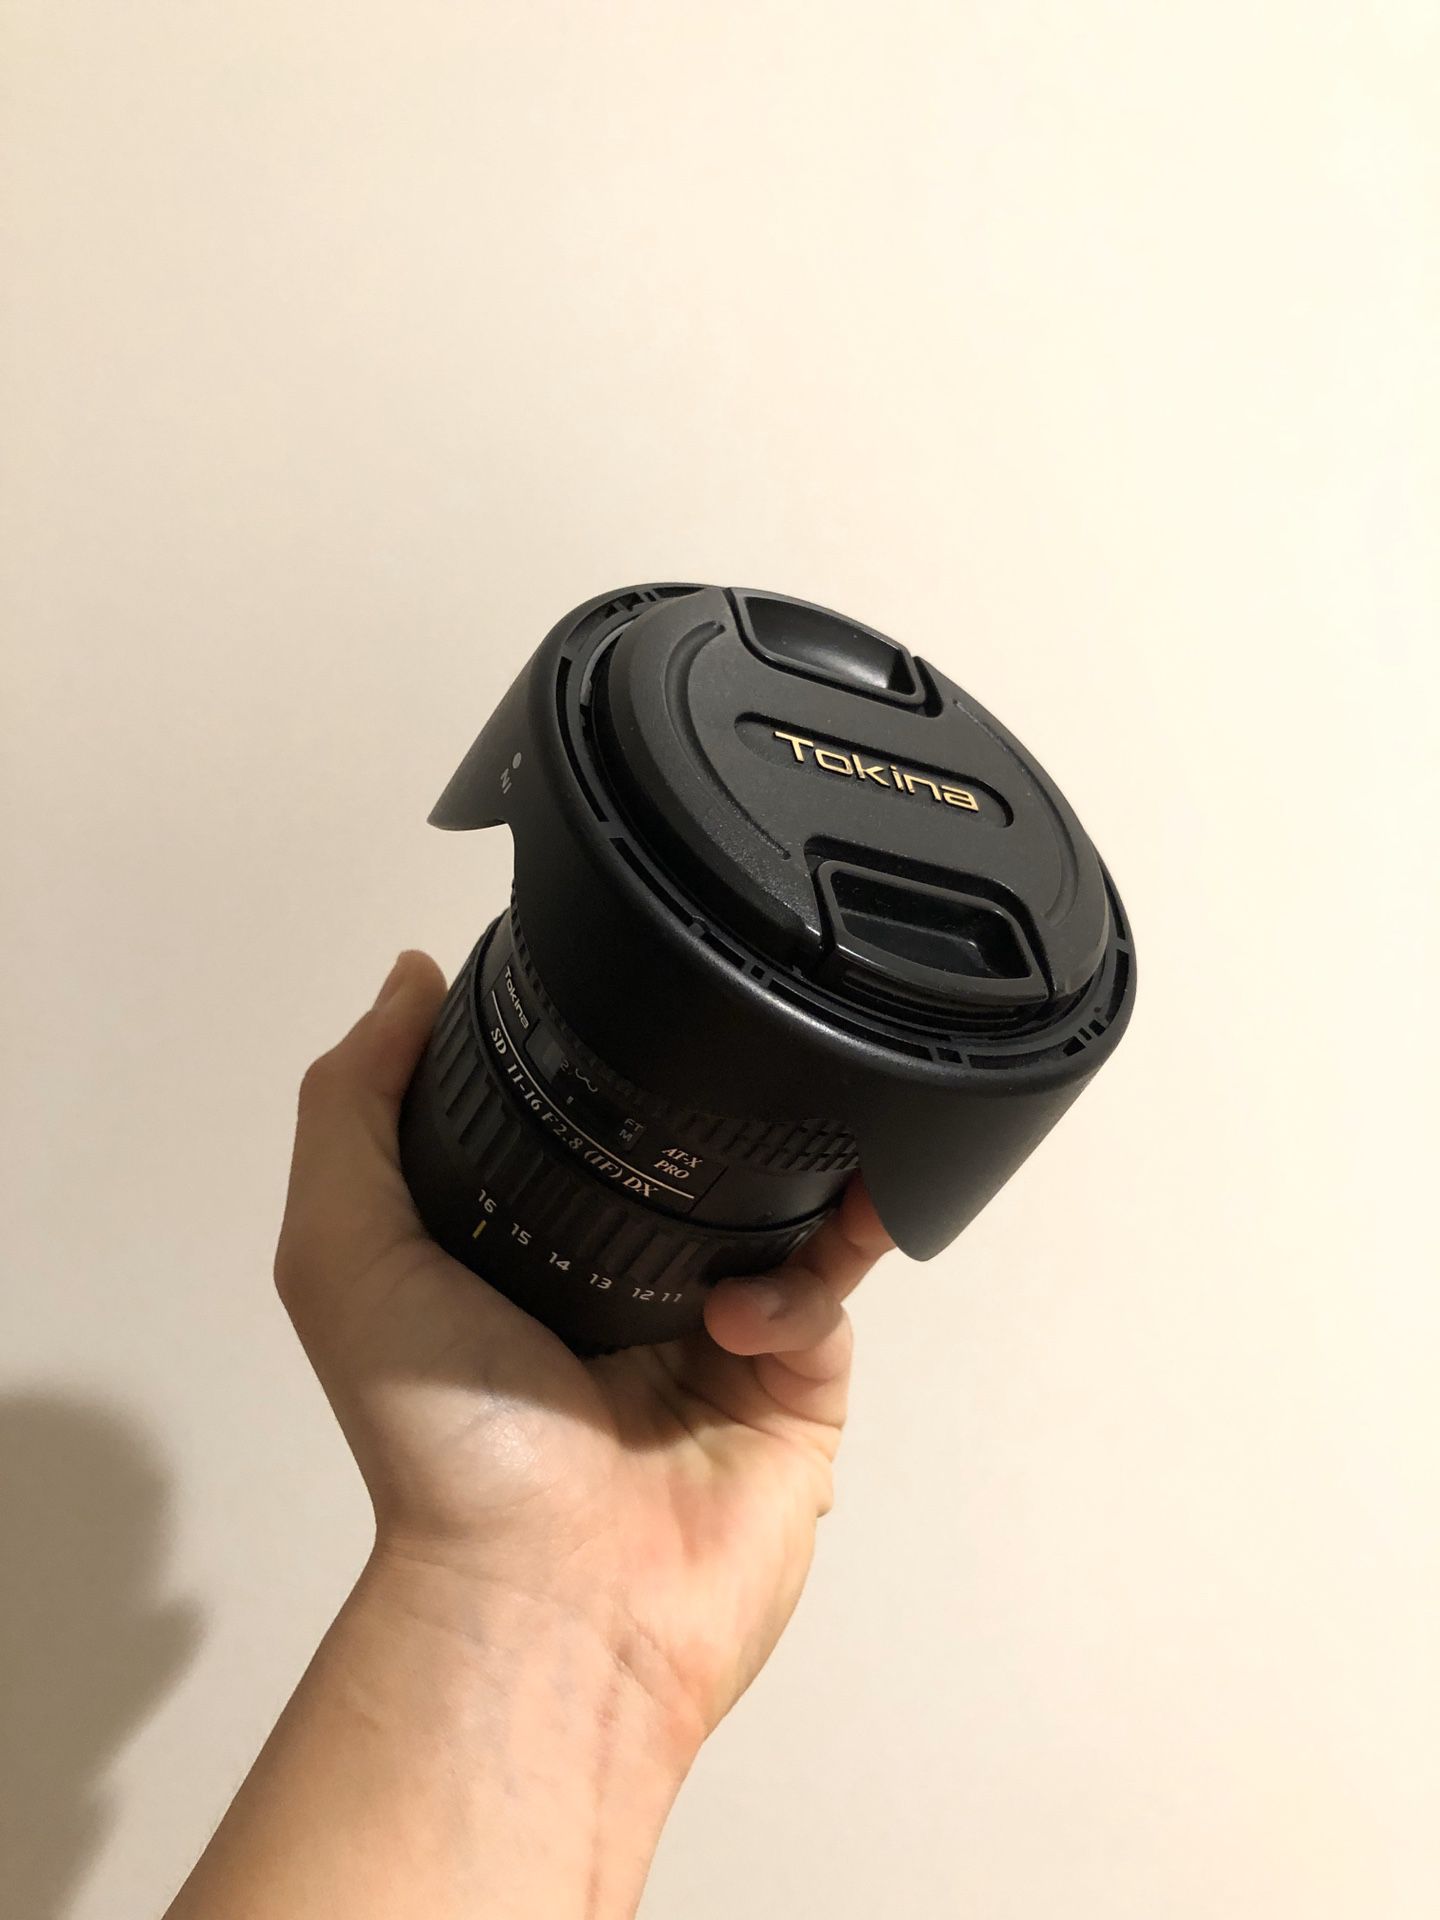 Tokina 11-16mm f/2.8 DX for canon